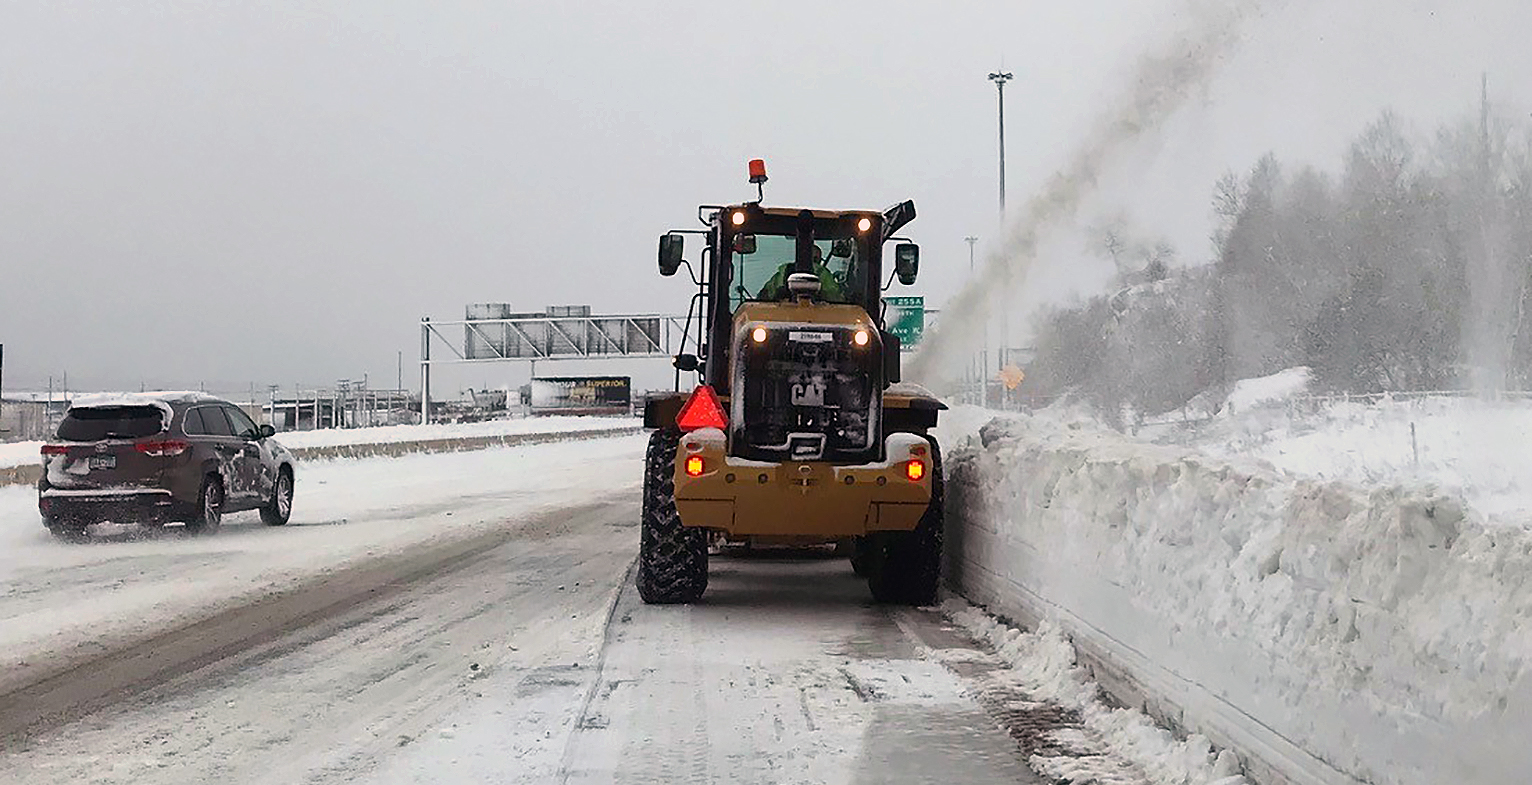 This photo shows a large snowblower blowing snow on the side of I-35. The snow to the right of the blower is close to four feet tall.